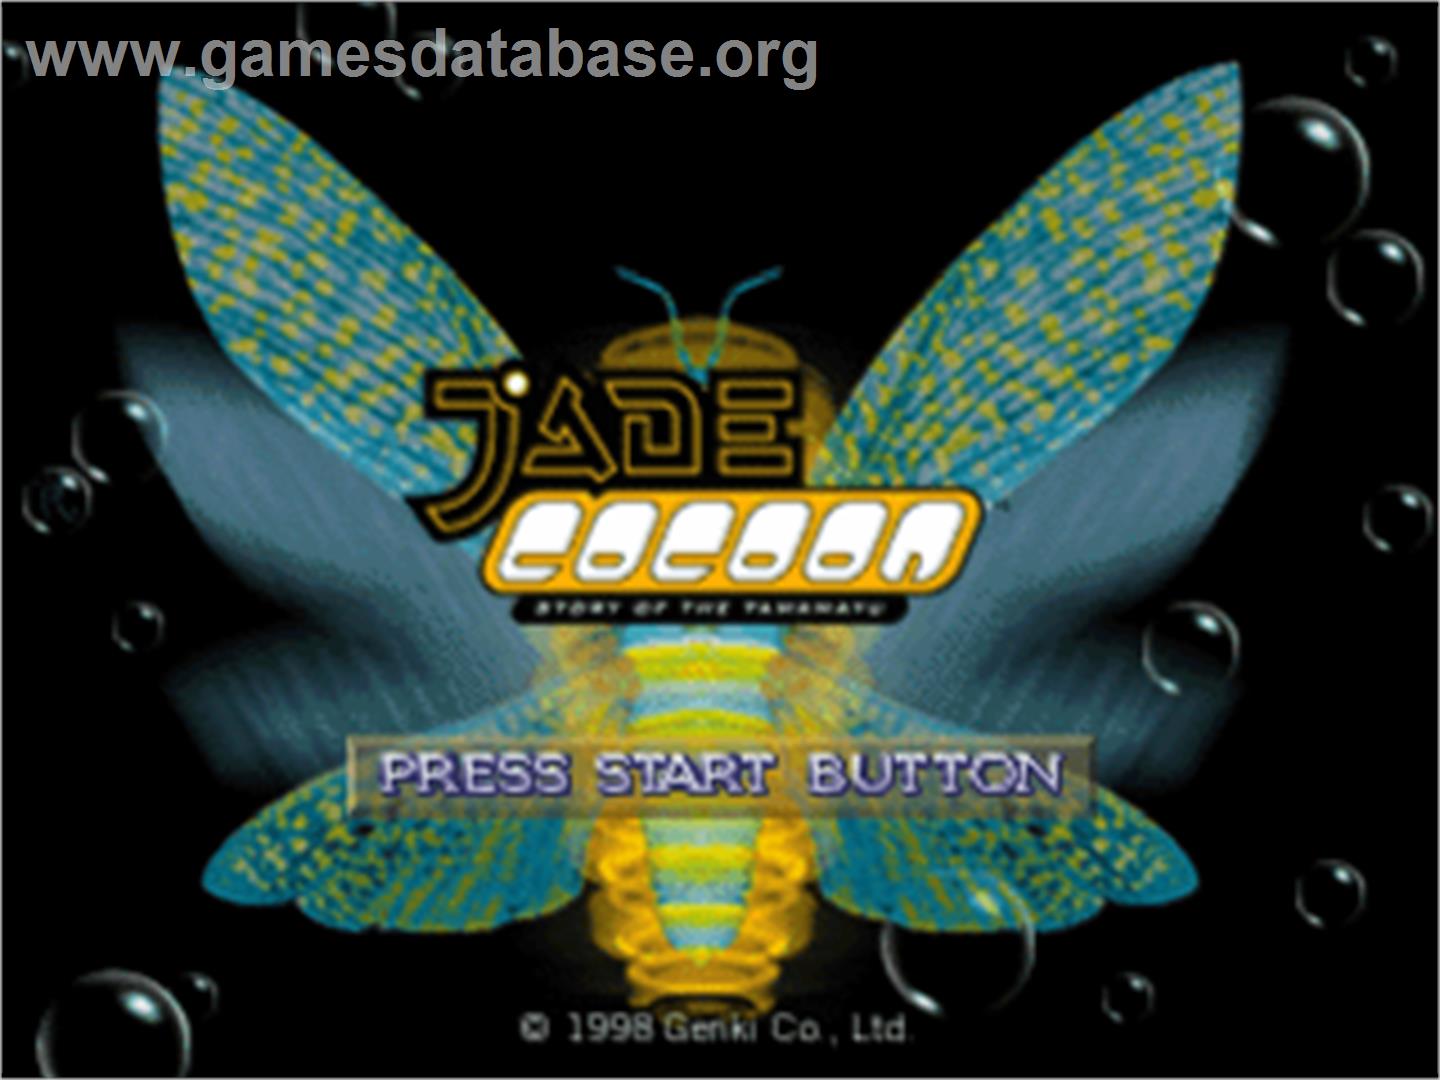 Jade Cocoon: Story of the Tamamayu - Sony Playstation - Artwork - Title Screen